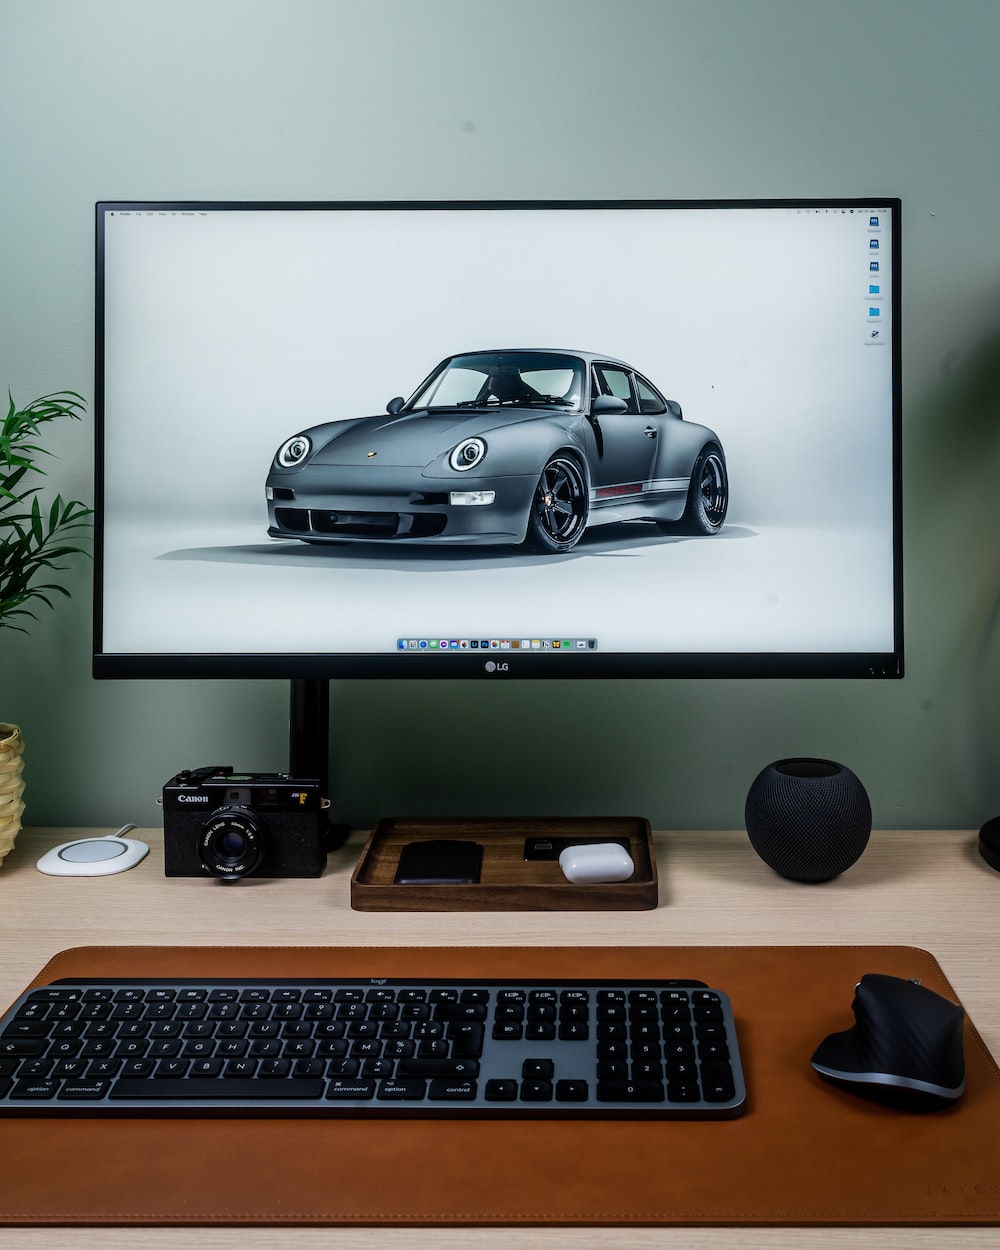 How far should computer monitor be from eyes?